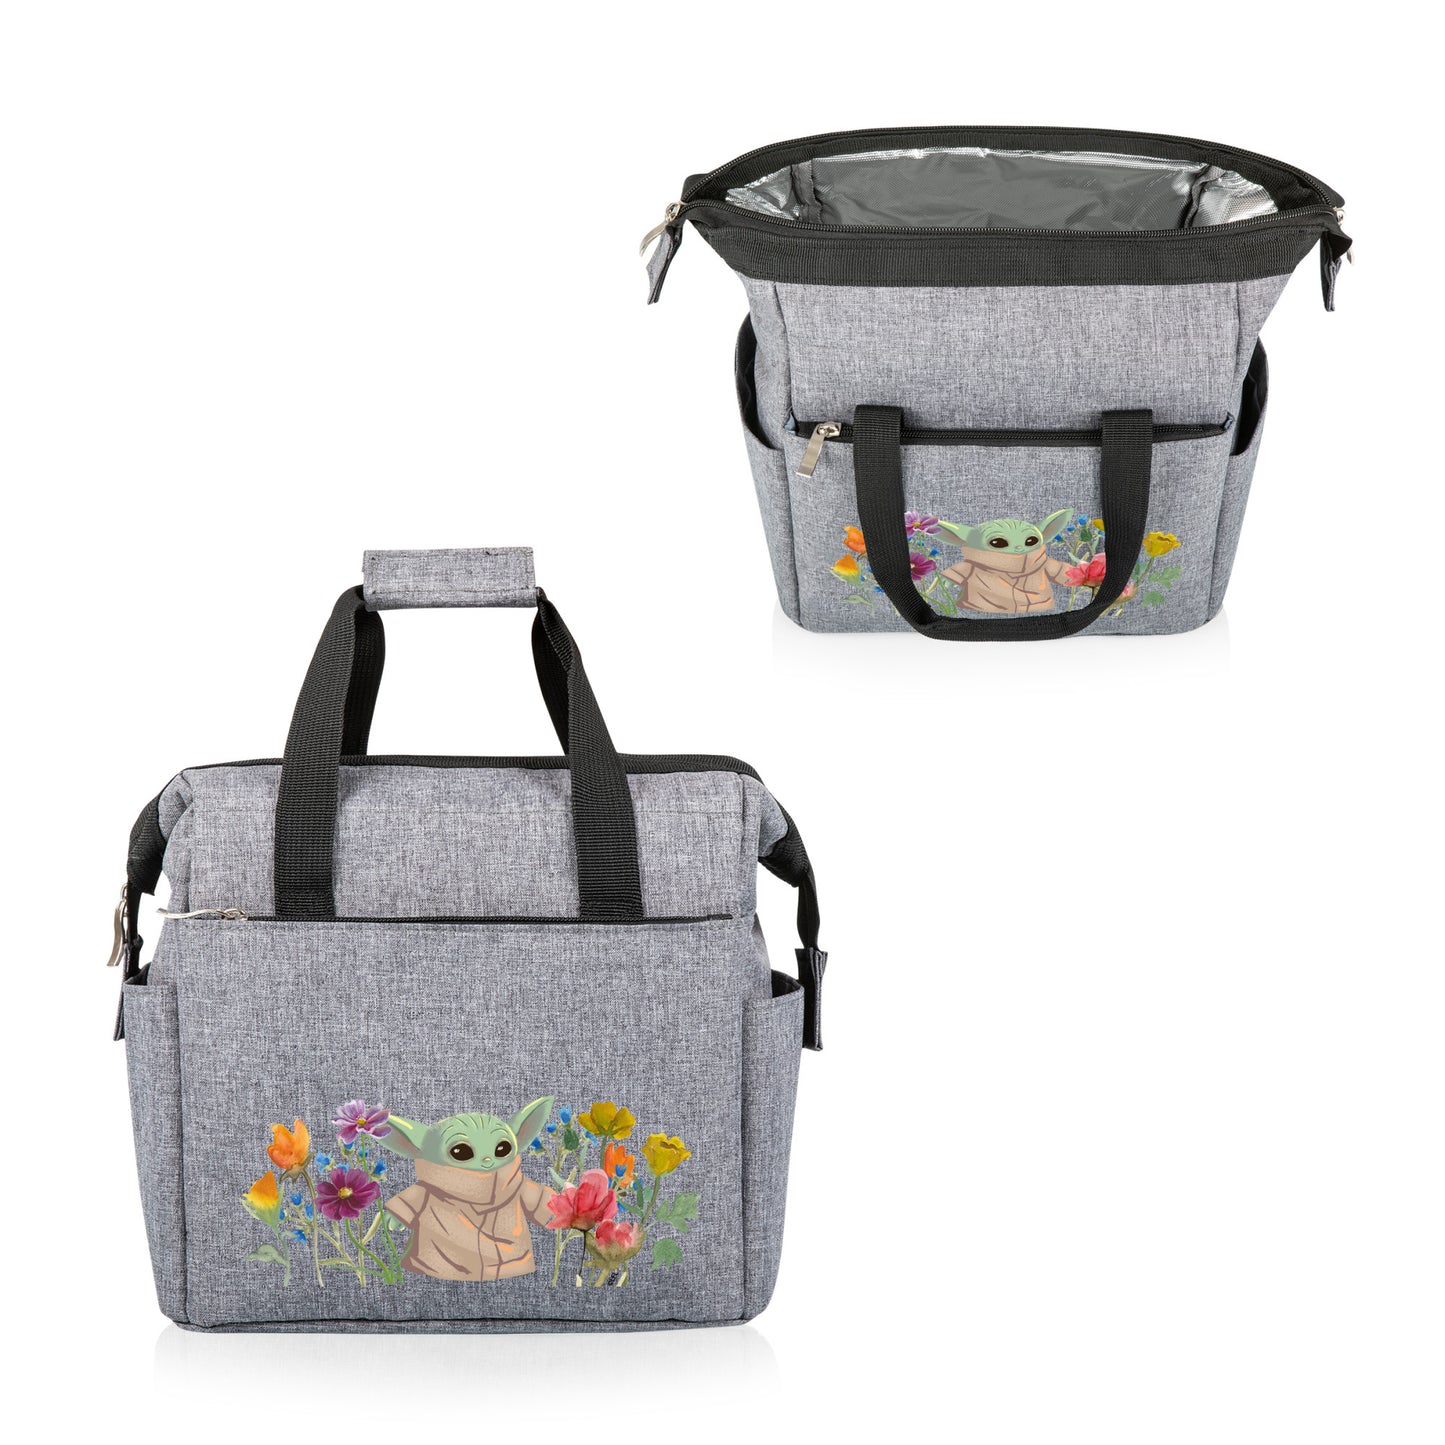 Grogu with Flowers (Star Wars: The Mandalorian) Insulated Lunch Tote Bag